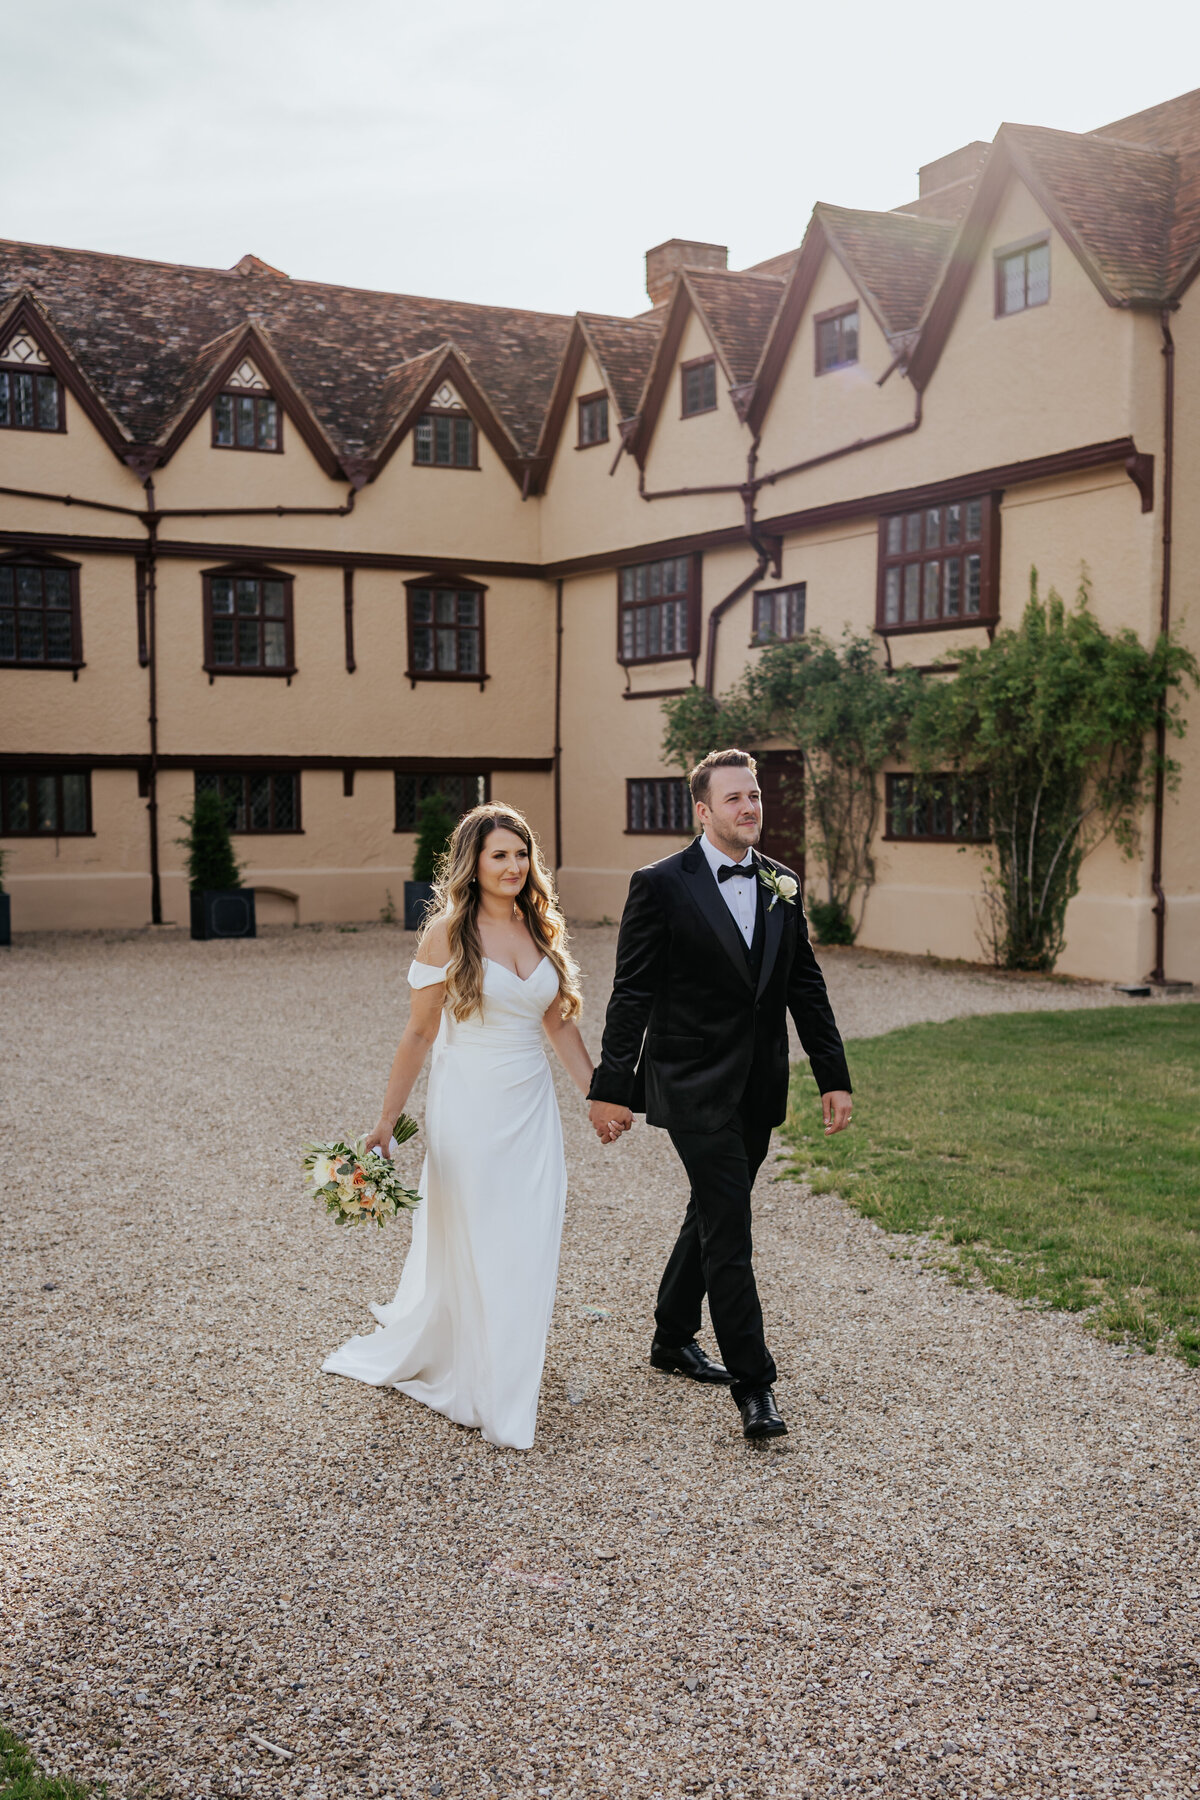 Bride and groom walk holding hands, walking away from the tudor house at Ufton Court at golden hour